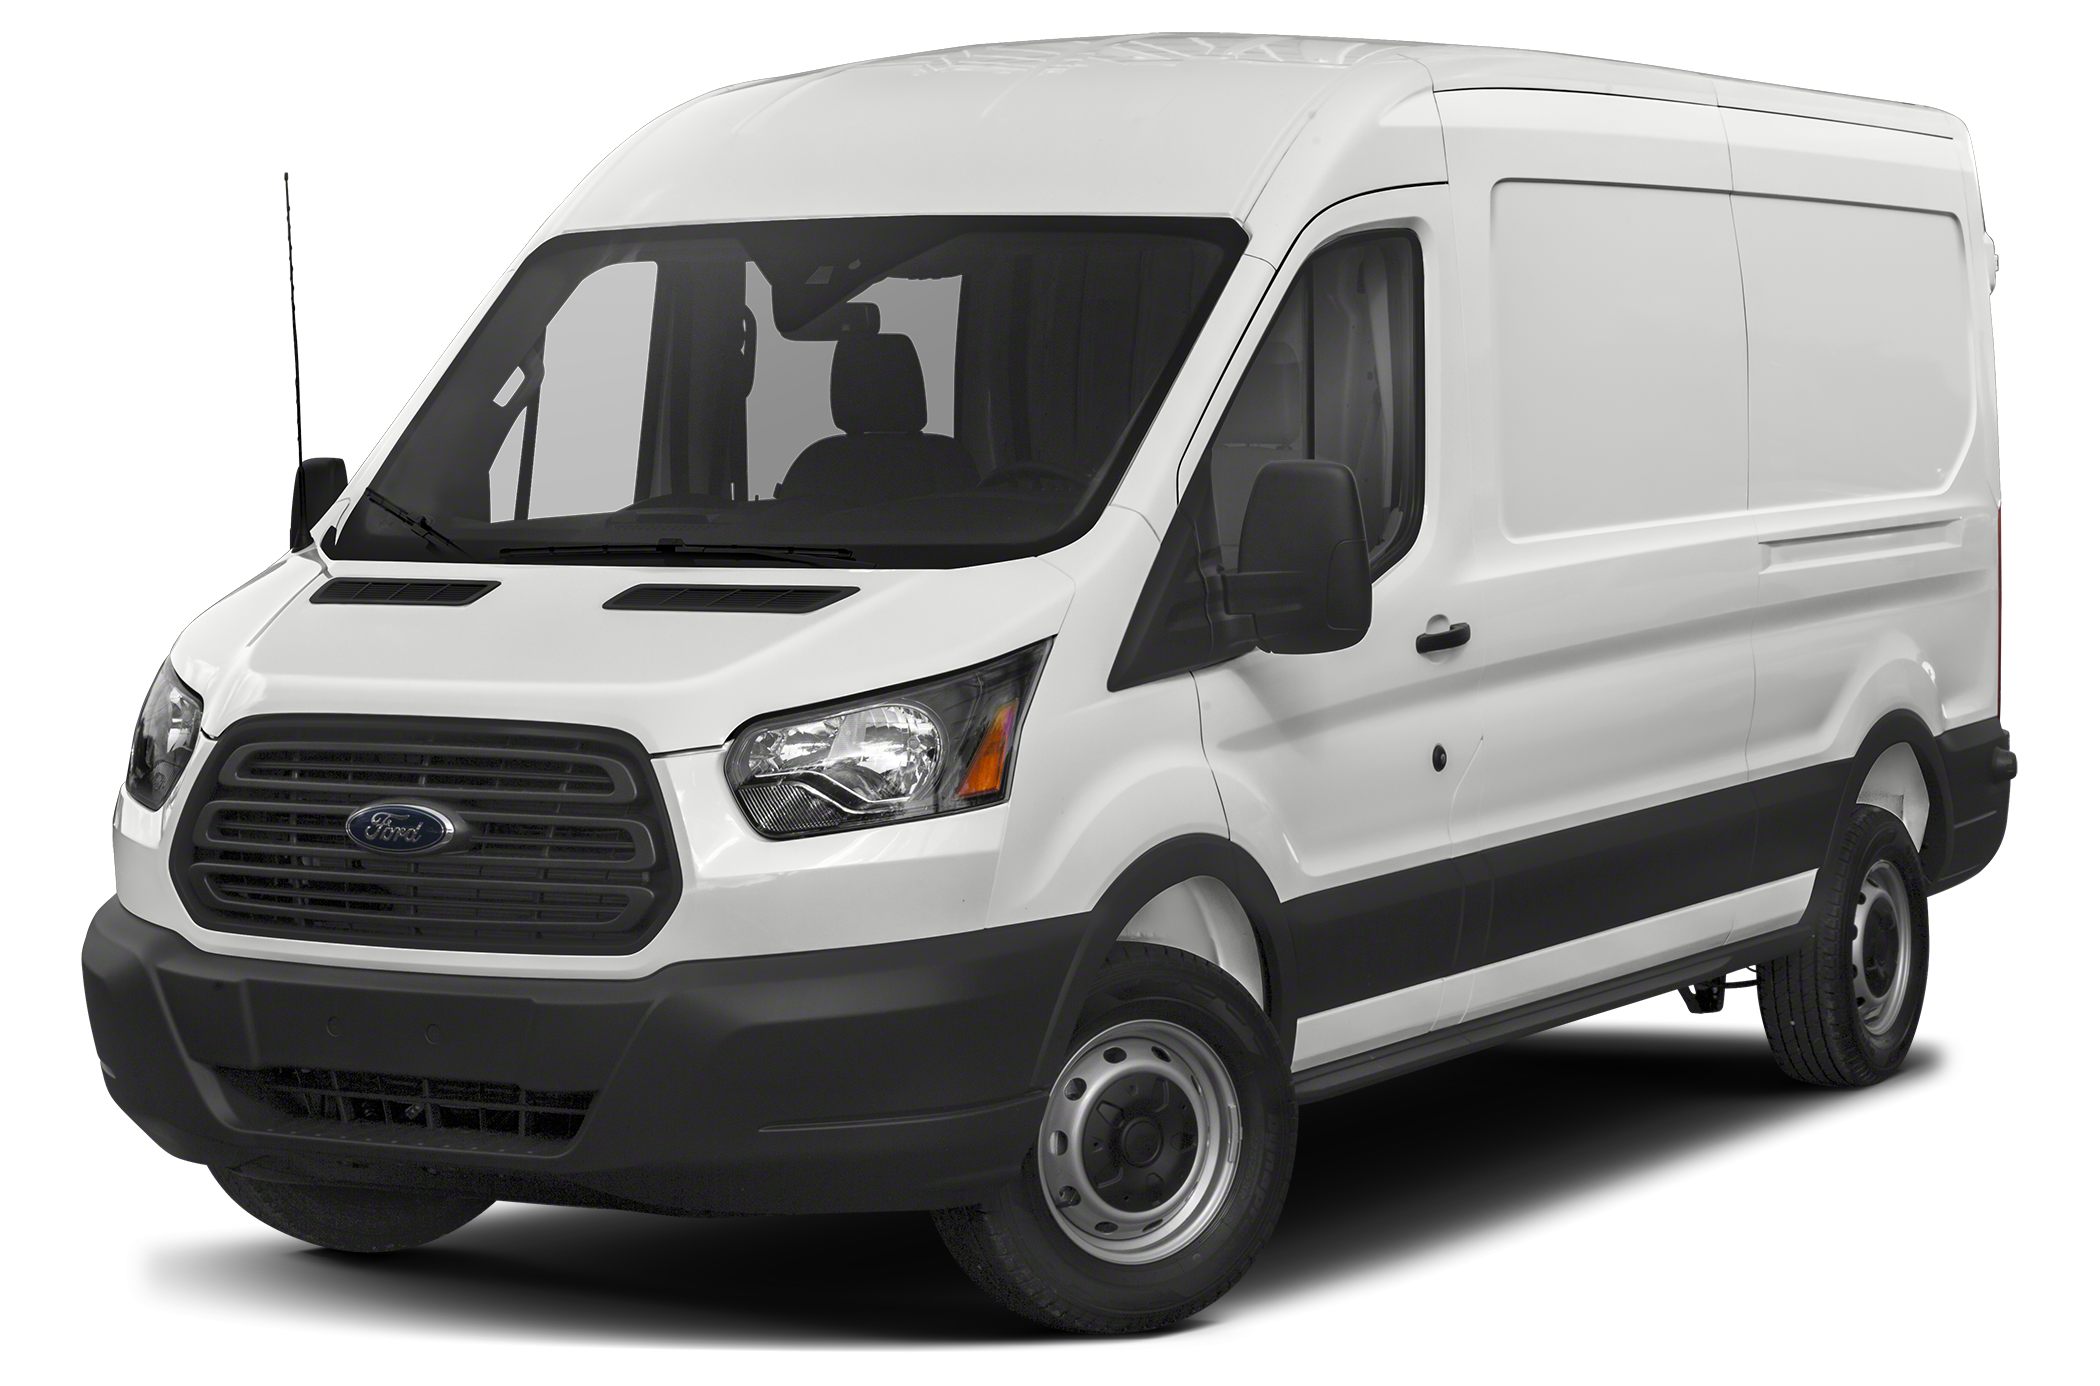 2019 Ford Transit-250 w/Dual Sliding Side Cargo Doors Medium Roof Cargo Van 129.9 in. Safety Features